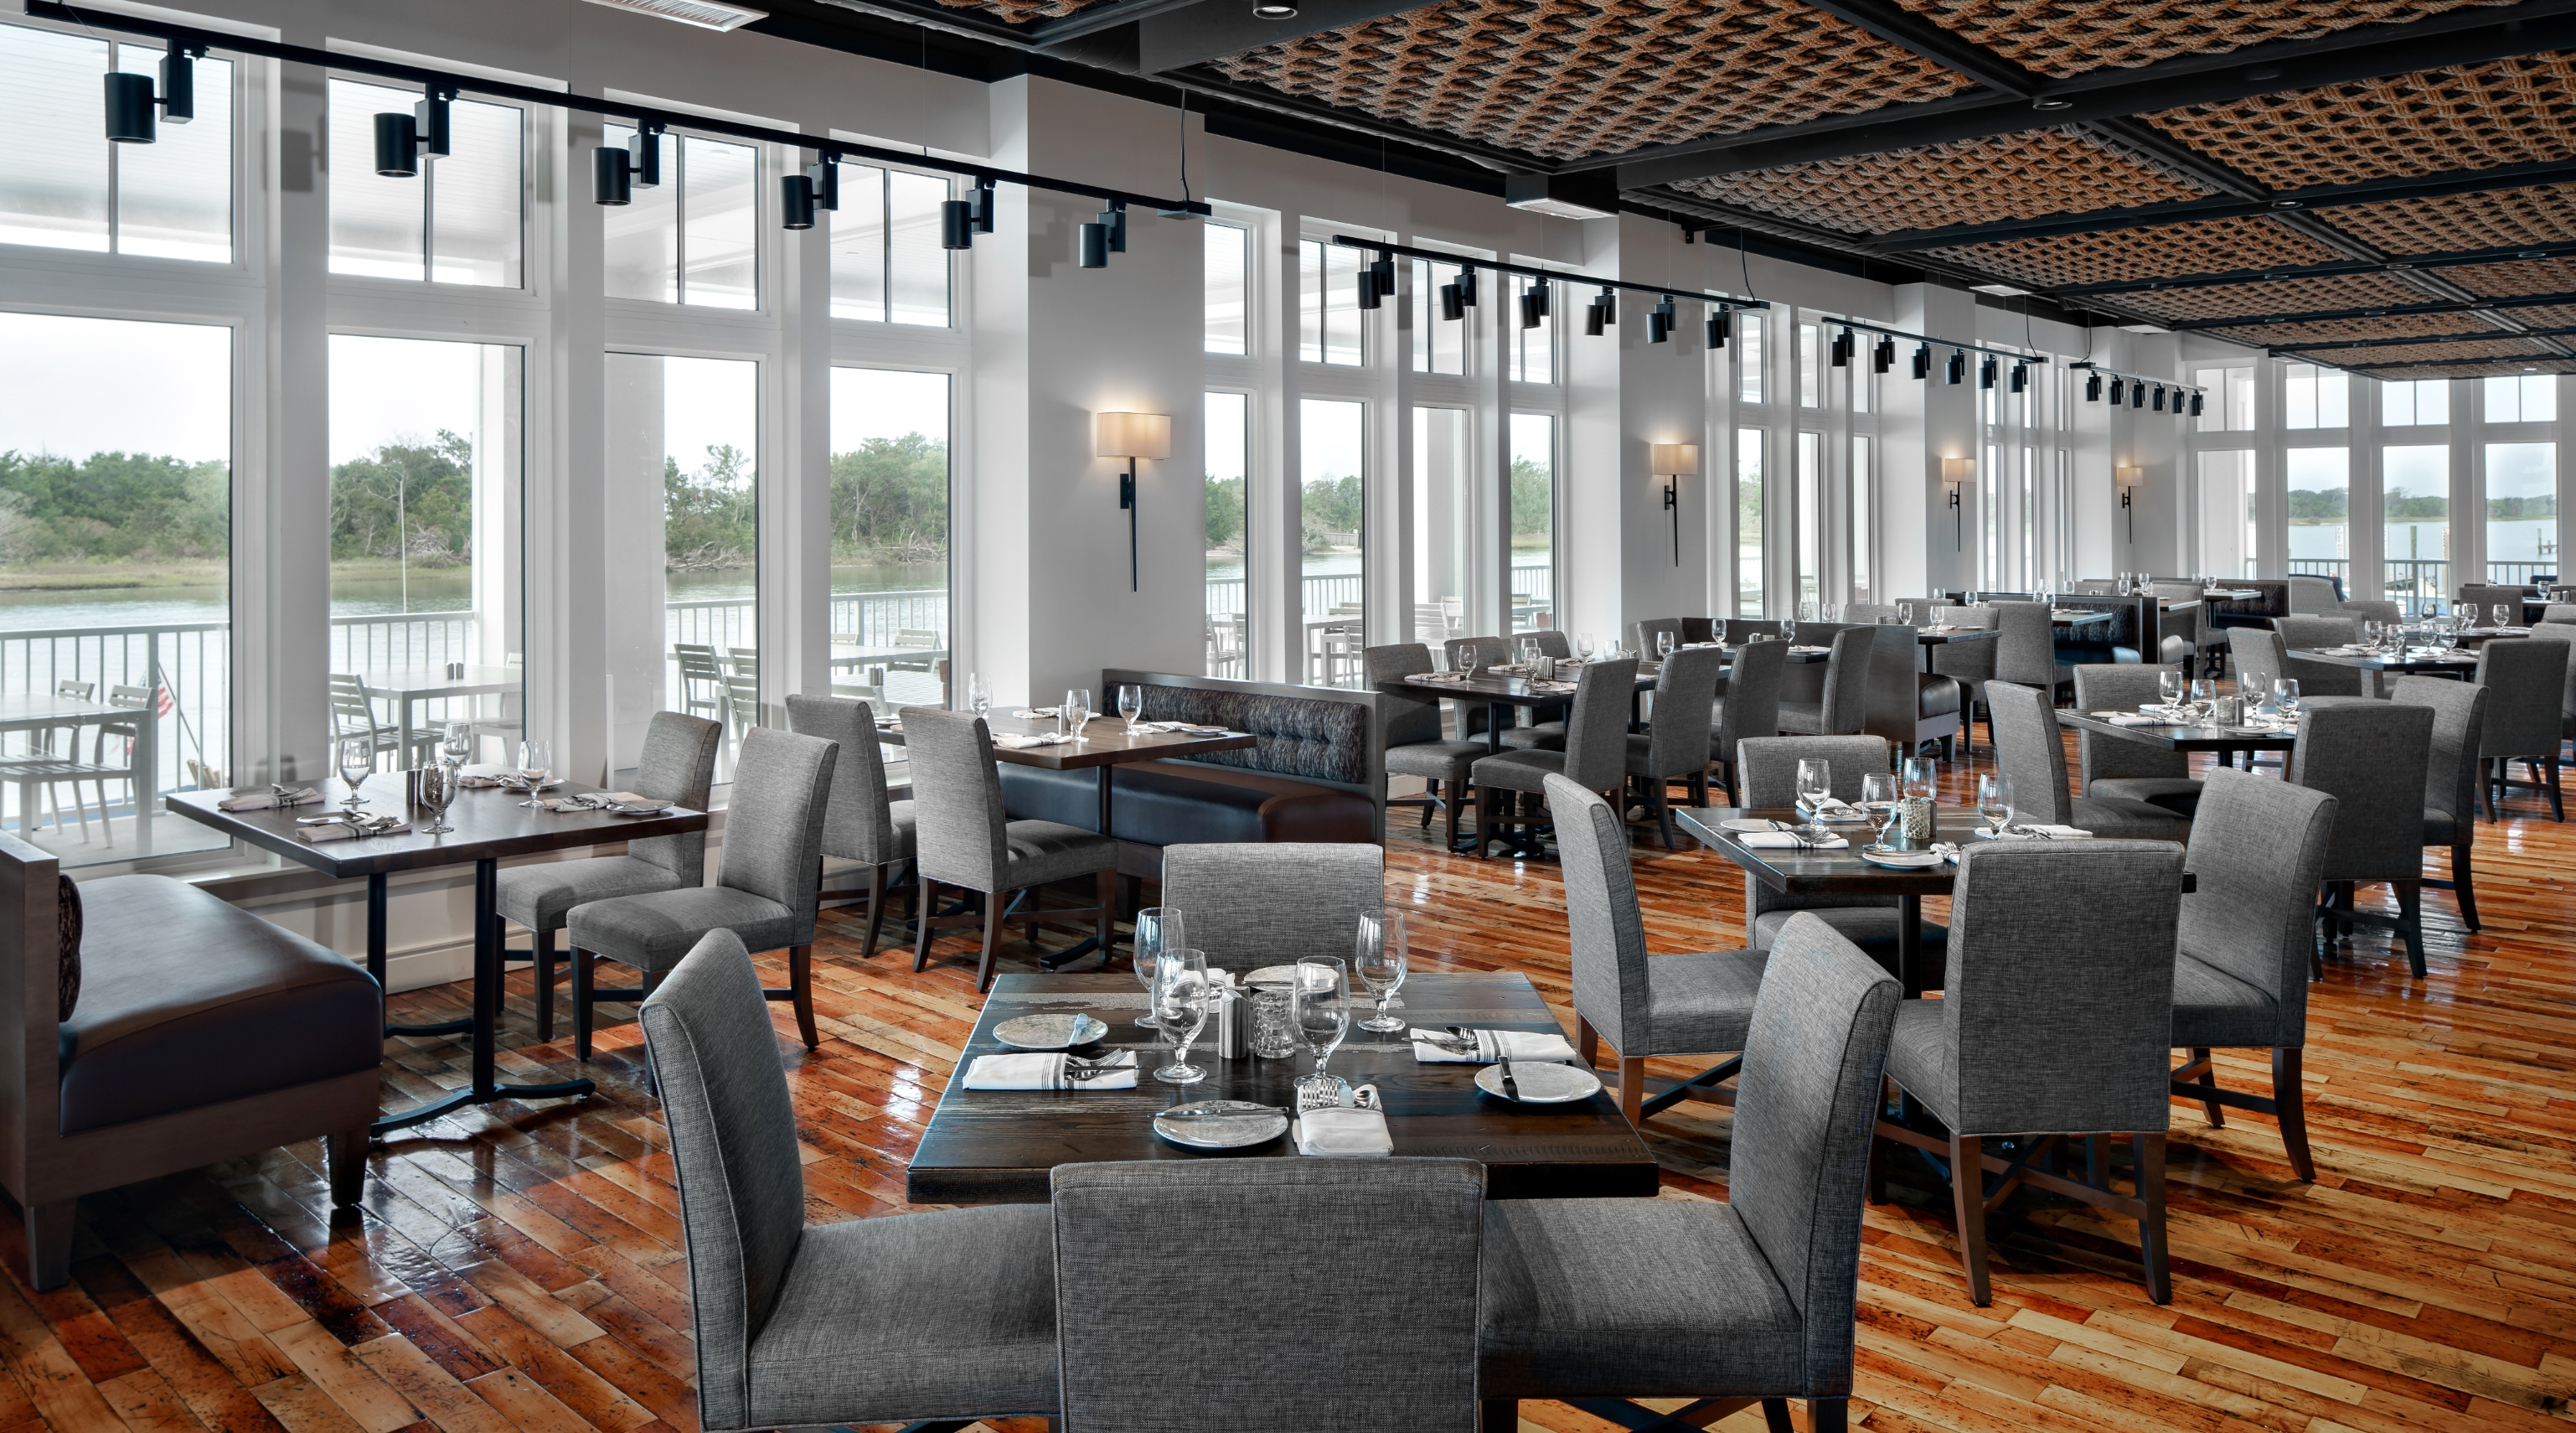 Main Dining Room at 34° North Restaurant in Beaufort, NC.